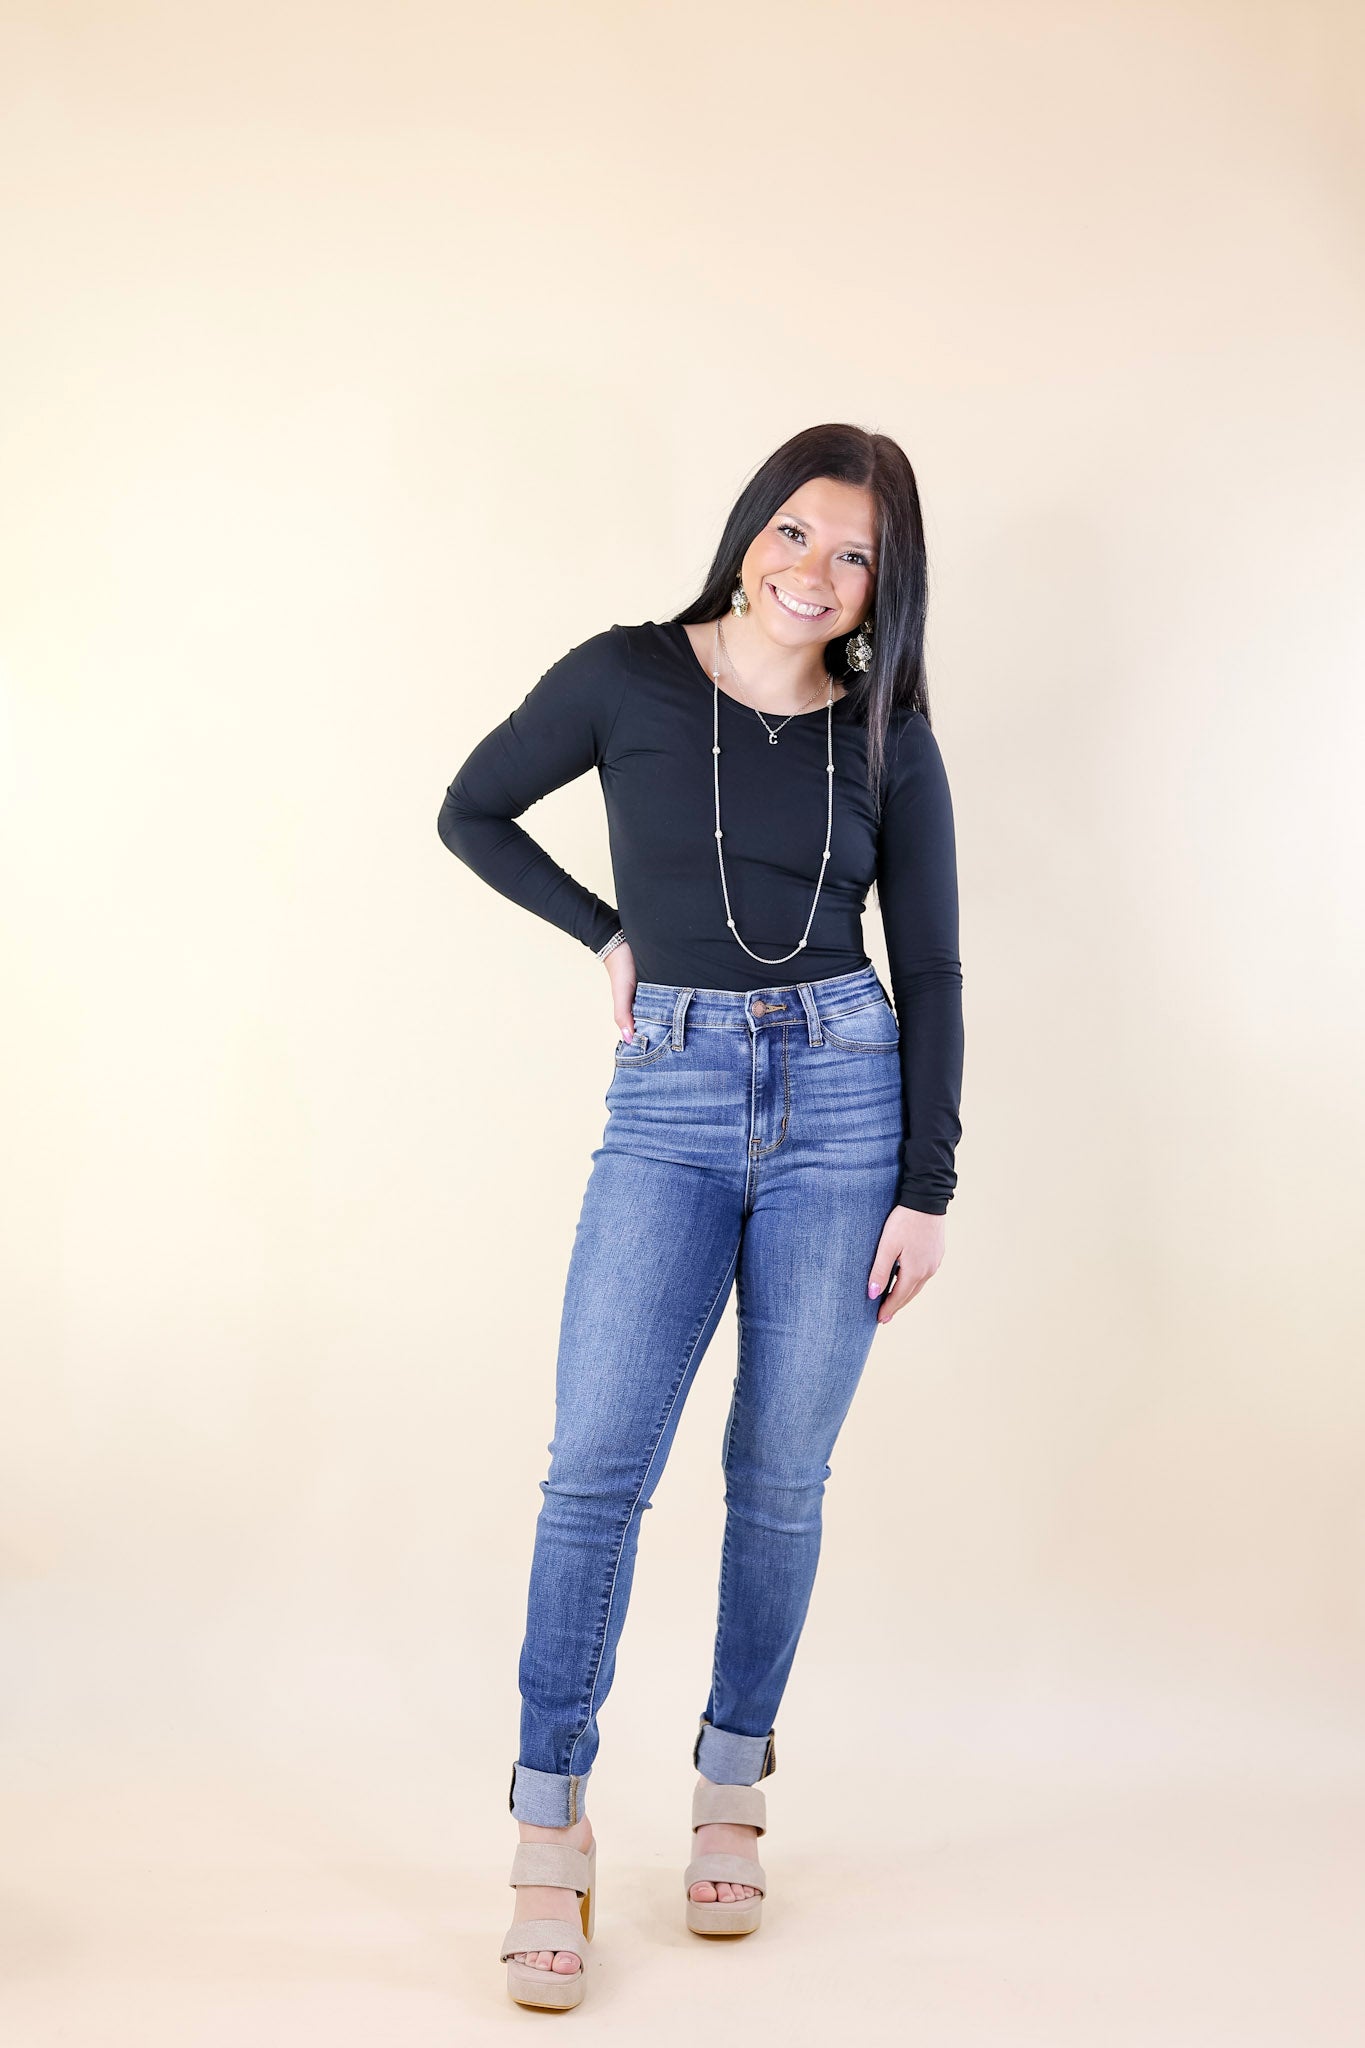 Judy Blue | Signature Stride Cuffed Hem Skinny Jeans in Medium Wash - Giddy Up Glamour Boutique